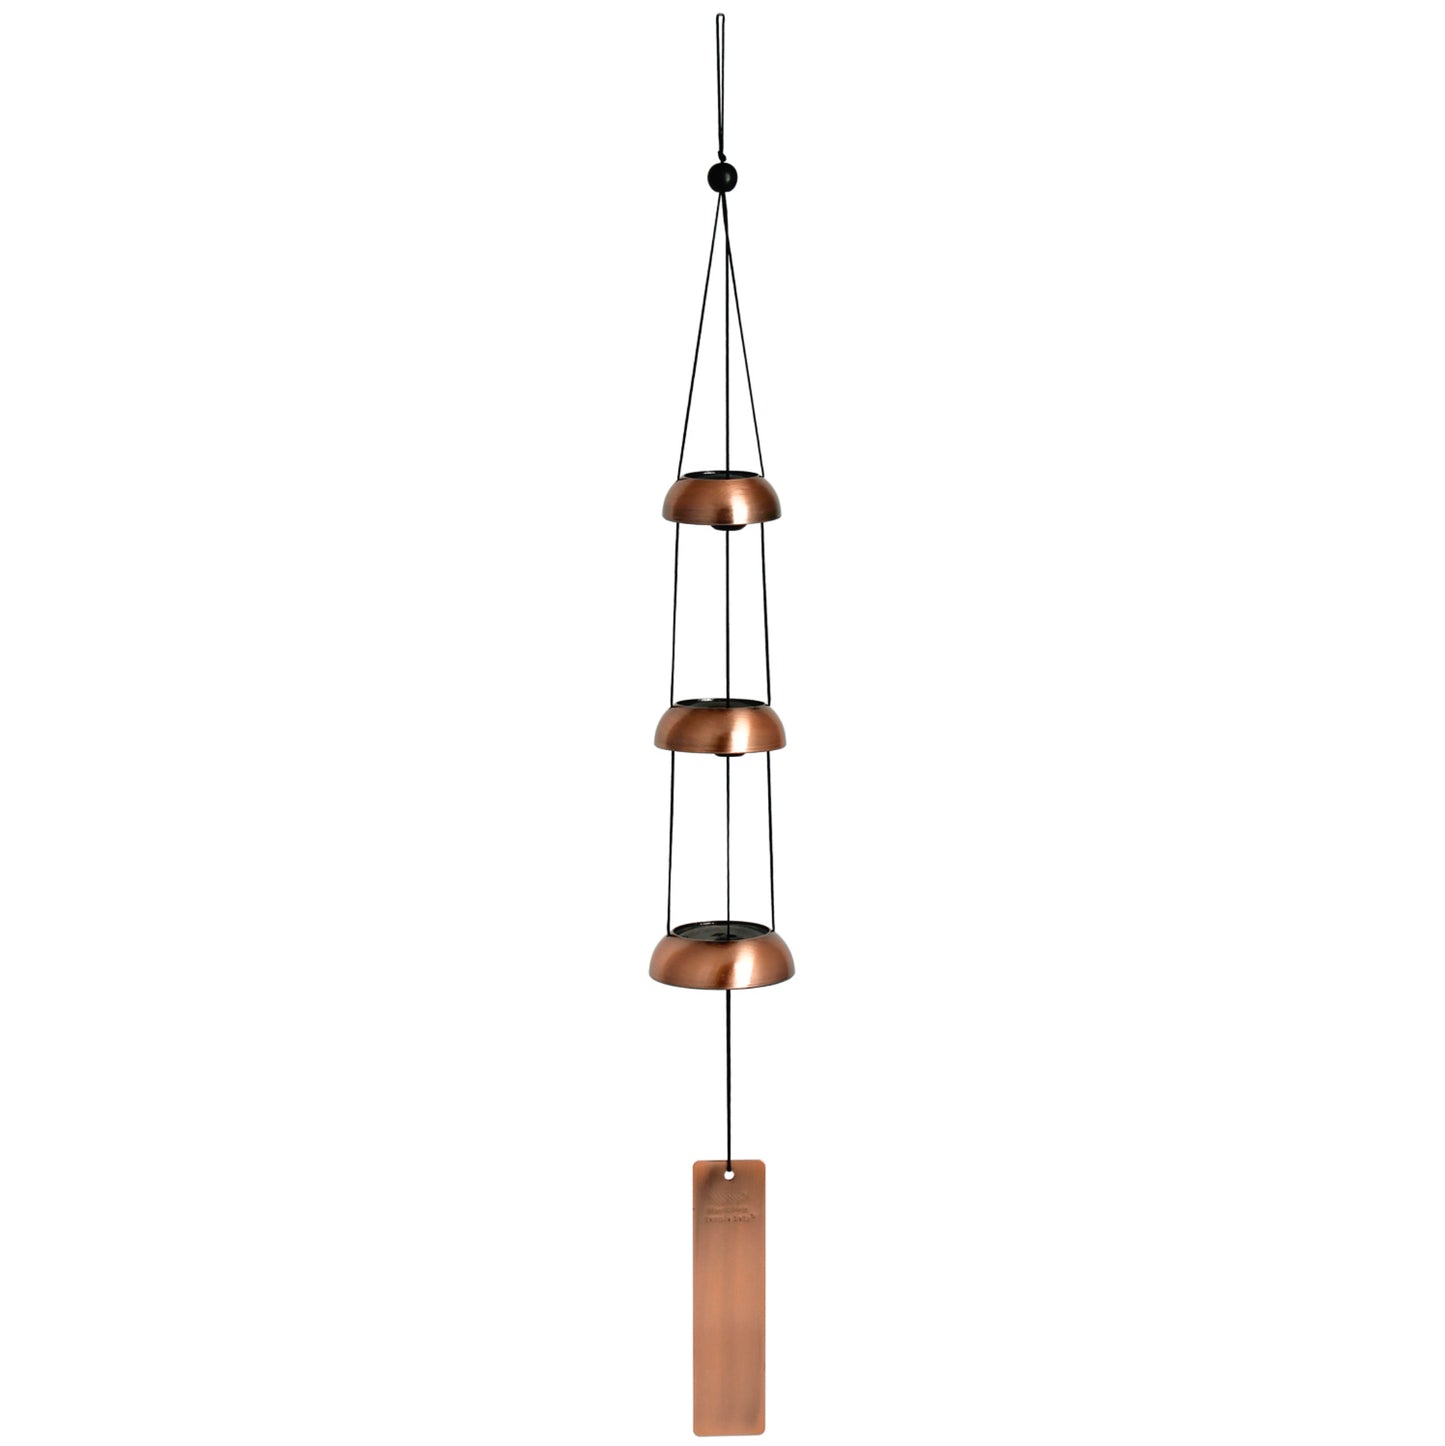 'Temple bell' wind chimes from Woodstock